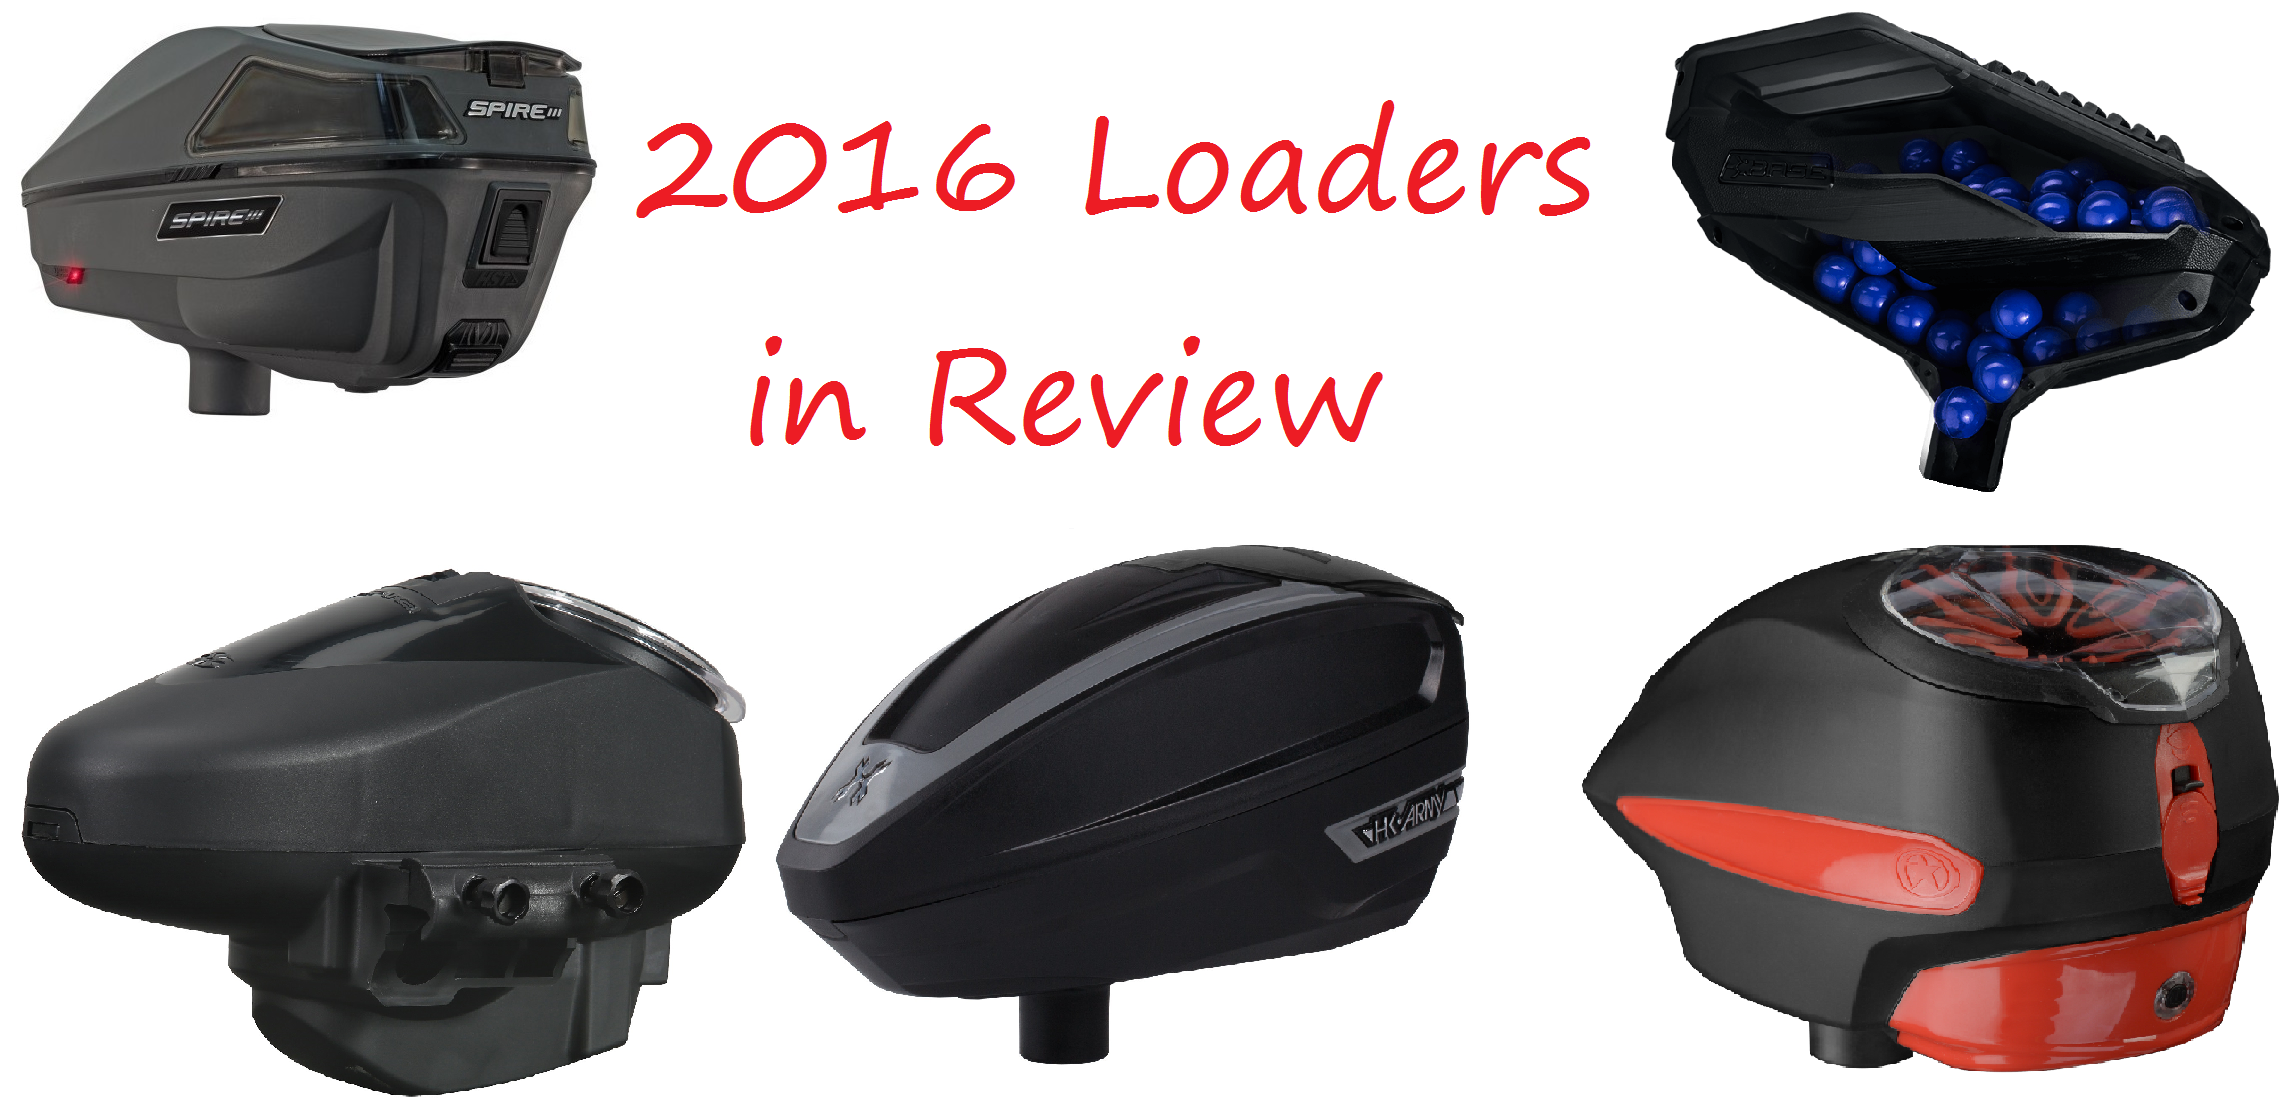 2016 Loaders in Review